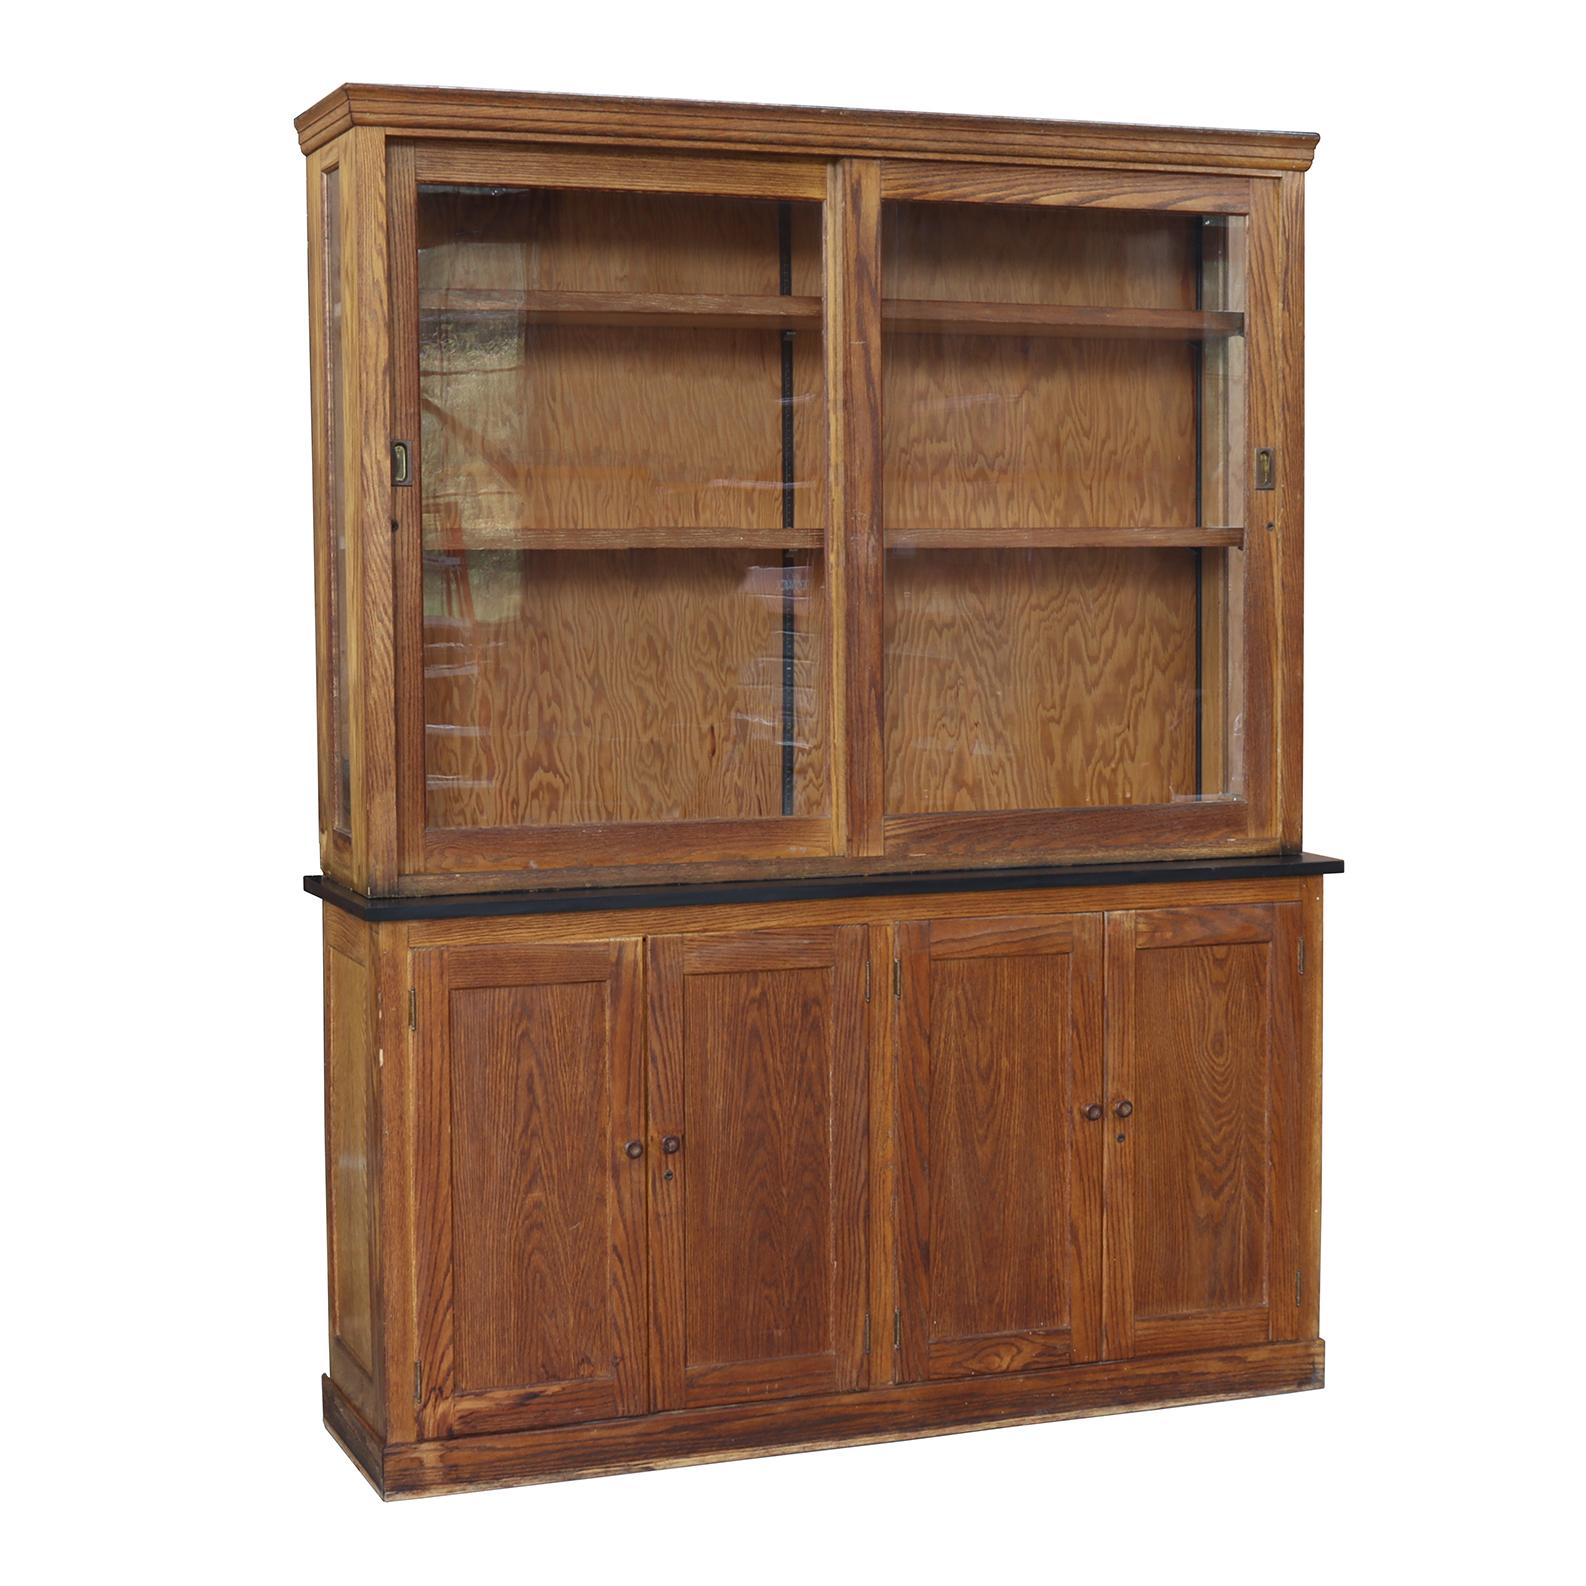 A fantastic early 20th-century laboratory storage cabinet in great condition, this piece is great for storage with visible display shelves in the upper cabinet and hidden options in the lower.

*Cabinet can be separated into upper and lower